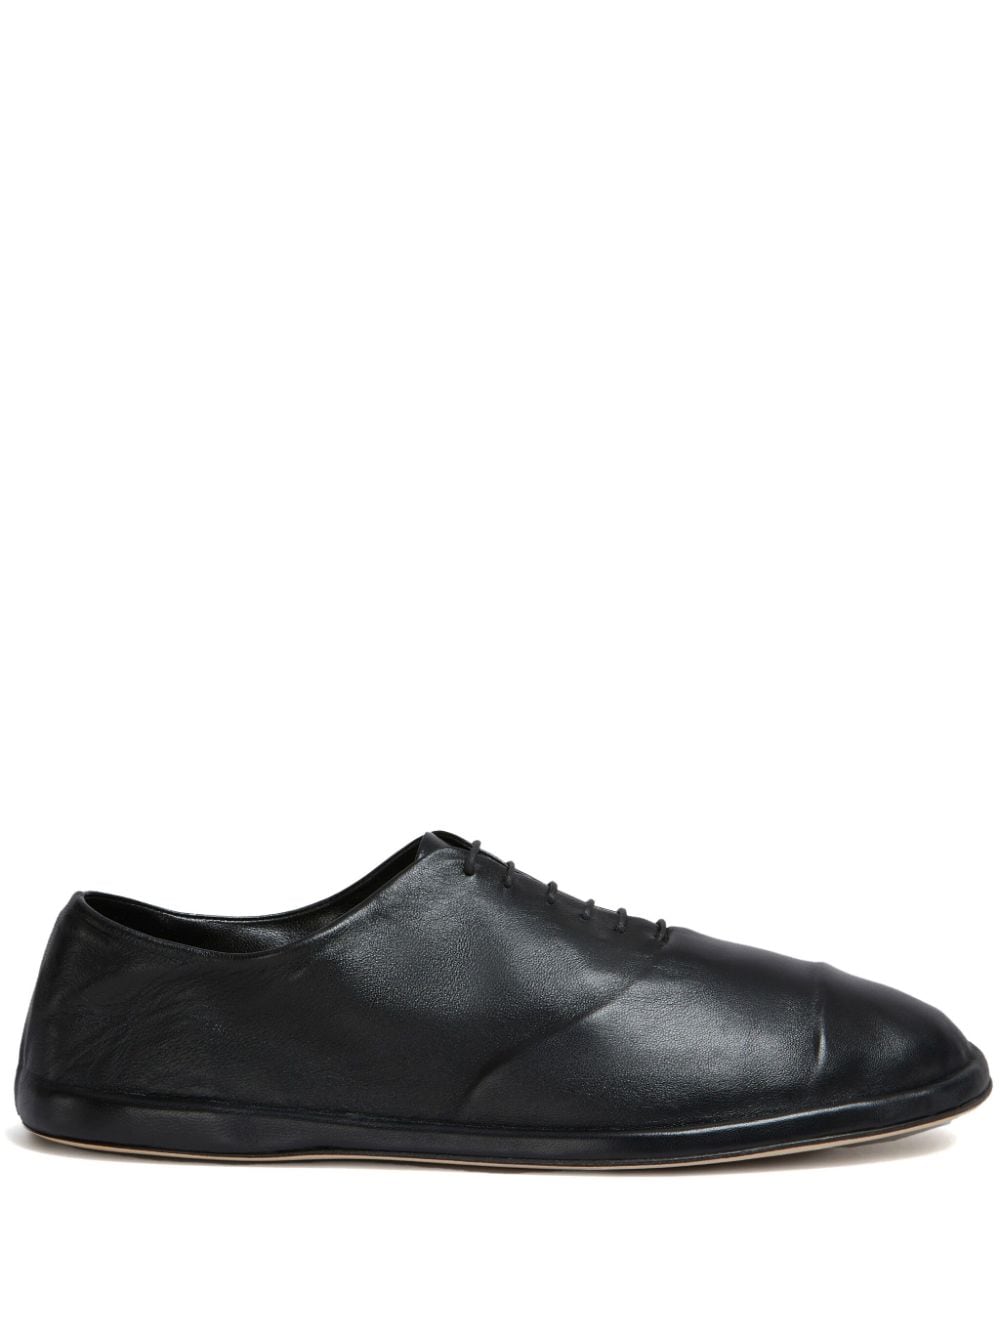 Marni Leather Oxford Shoes In Black